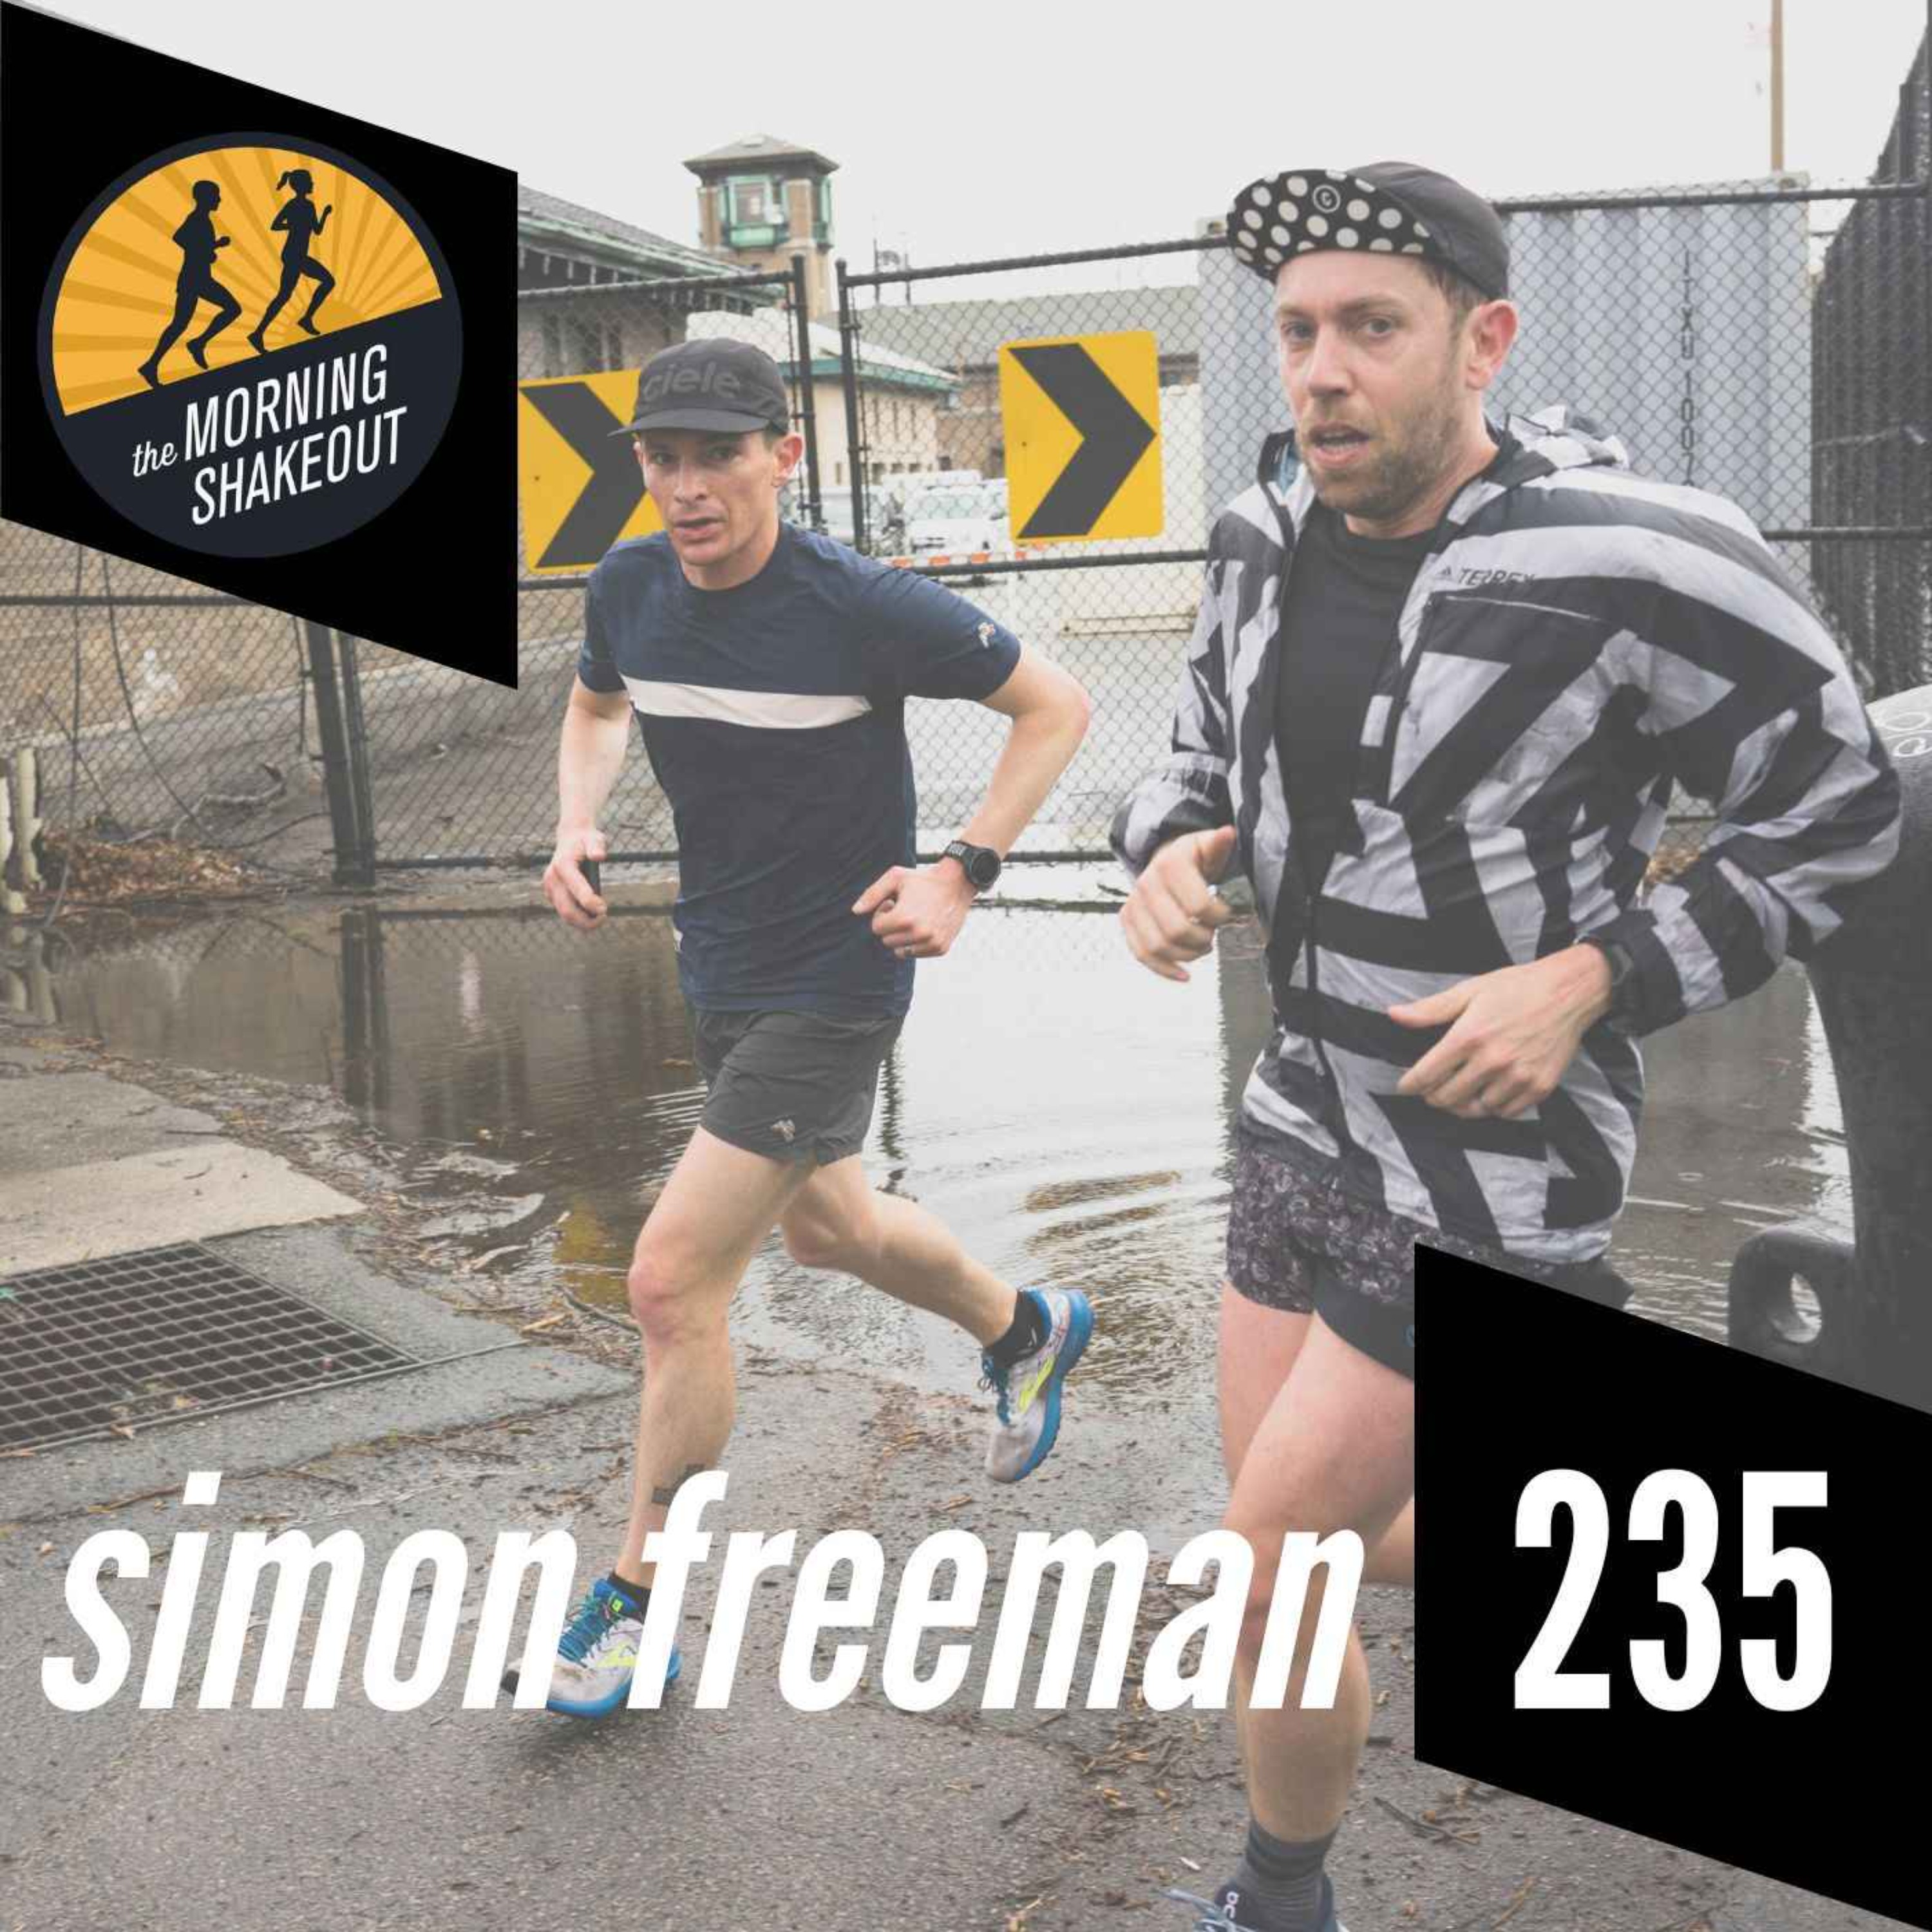 Episode 235 | Simon Freeman and Mario Fraioli on What We Can Learn From The Pros (And Vice Versa)